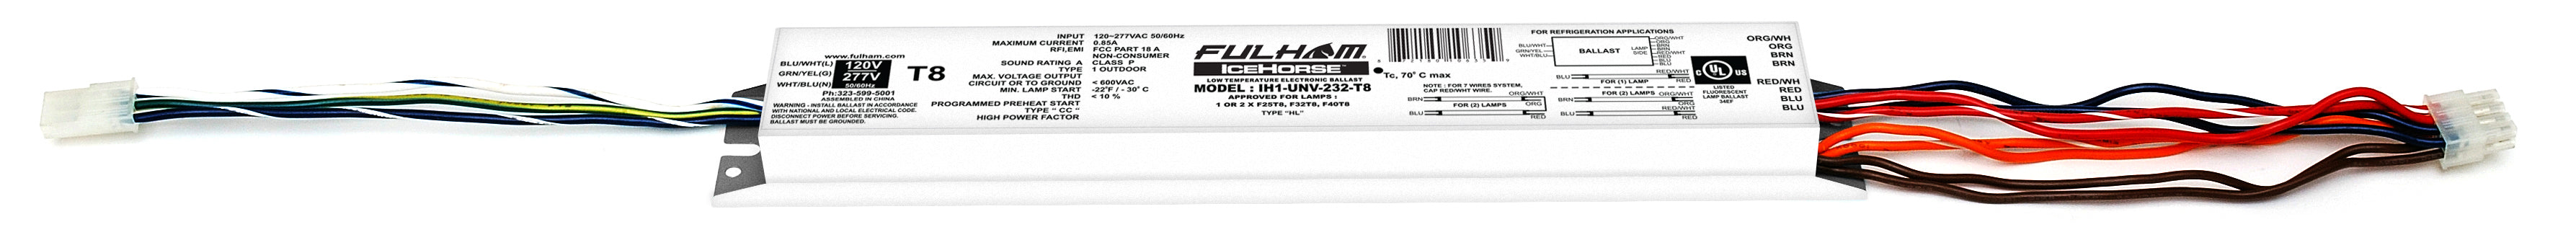 Fulham Electronic Fluorescent Icehorse Ballast For (1-2) F32T8 F40T8 Lamps Run At 120/277V (IH1-UNV-232-T8)